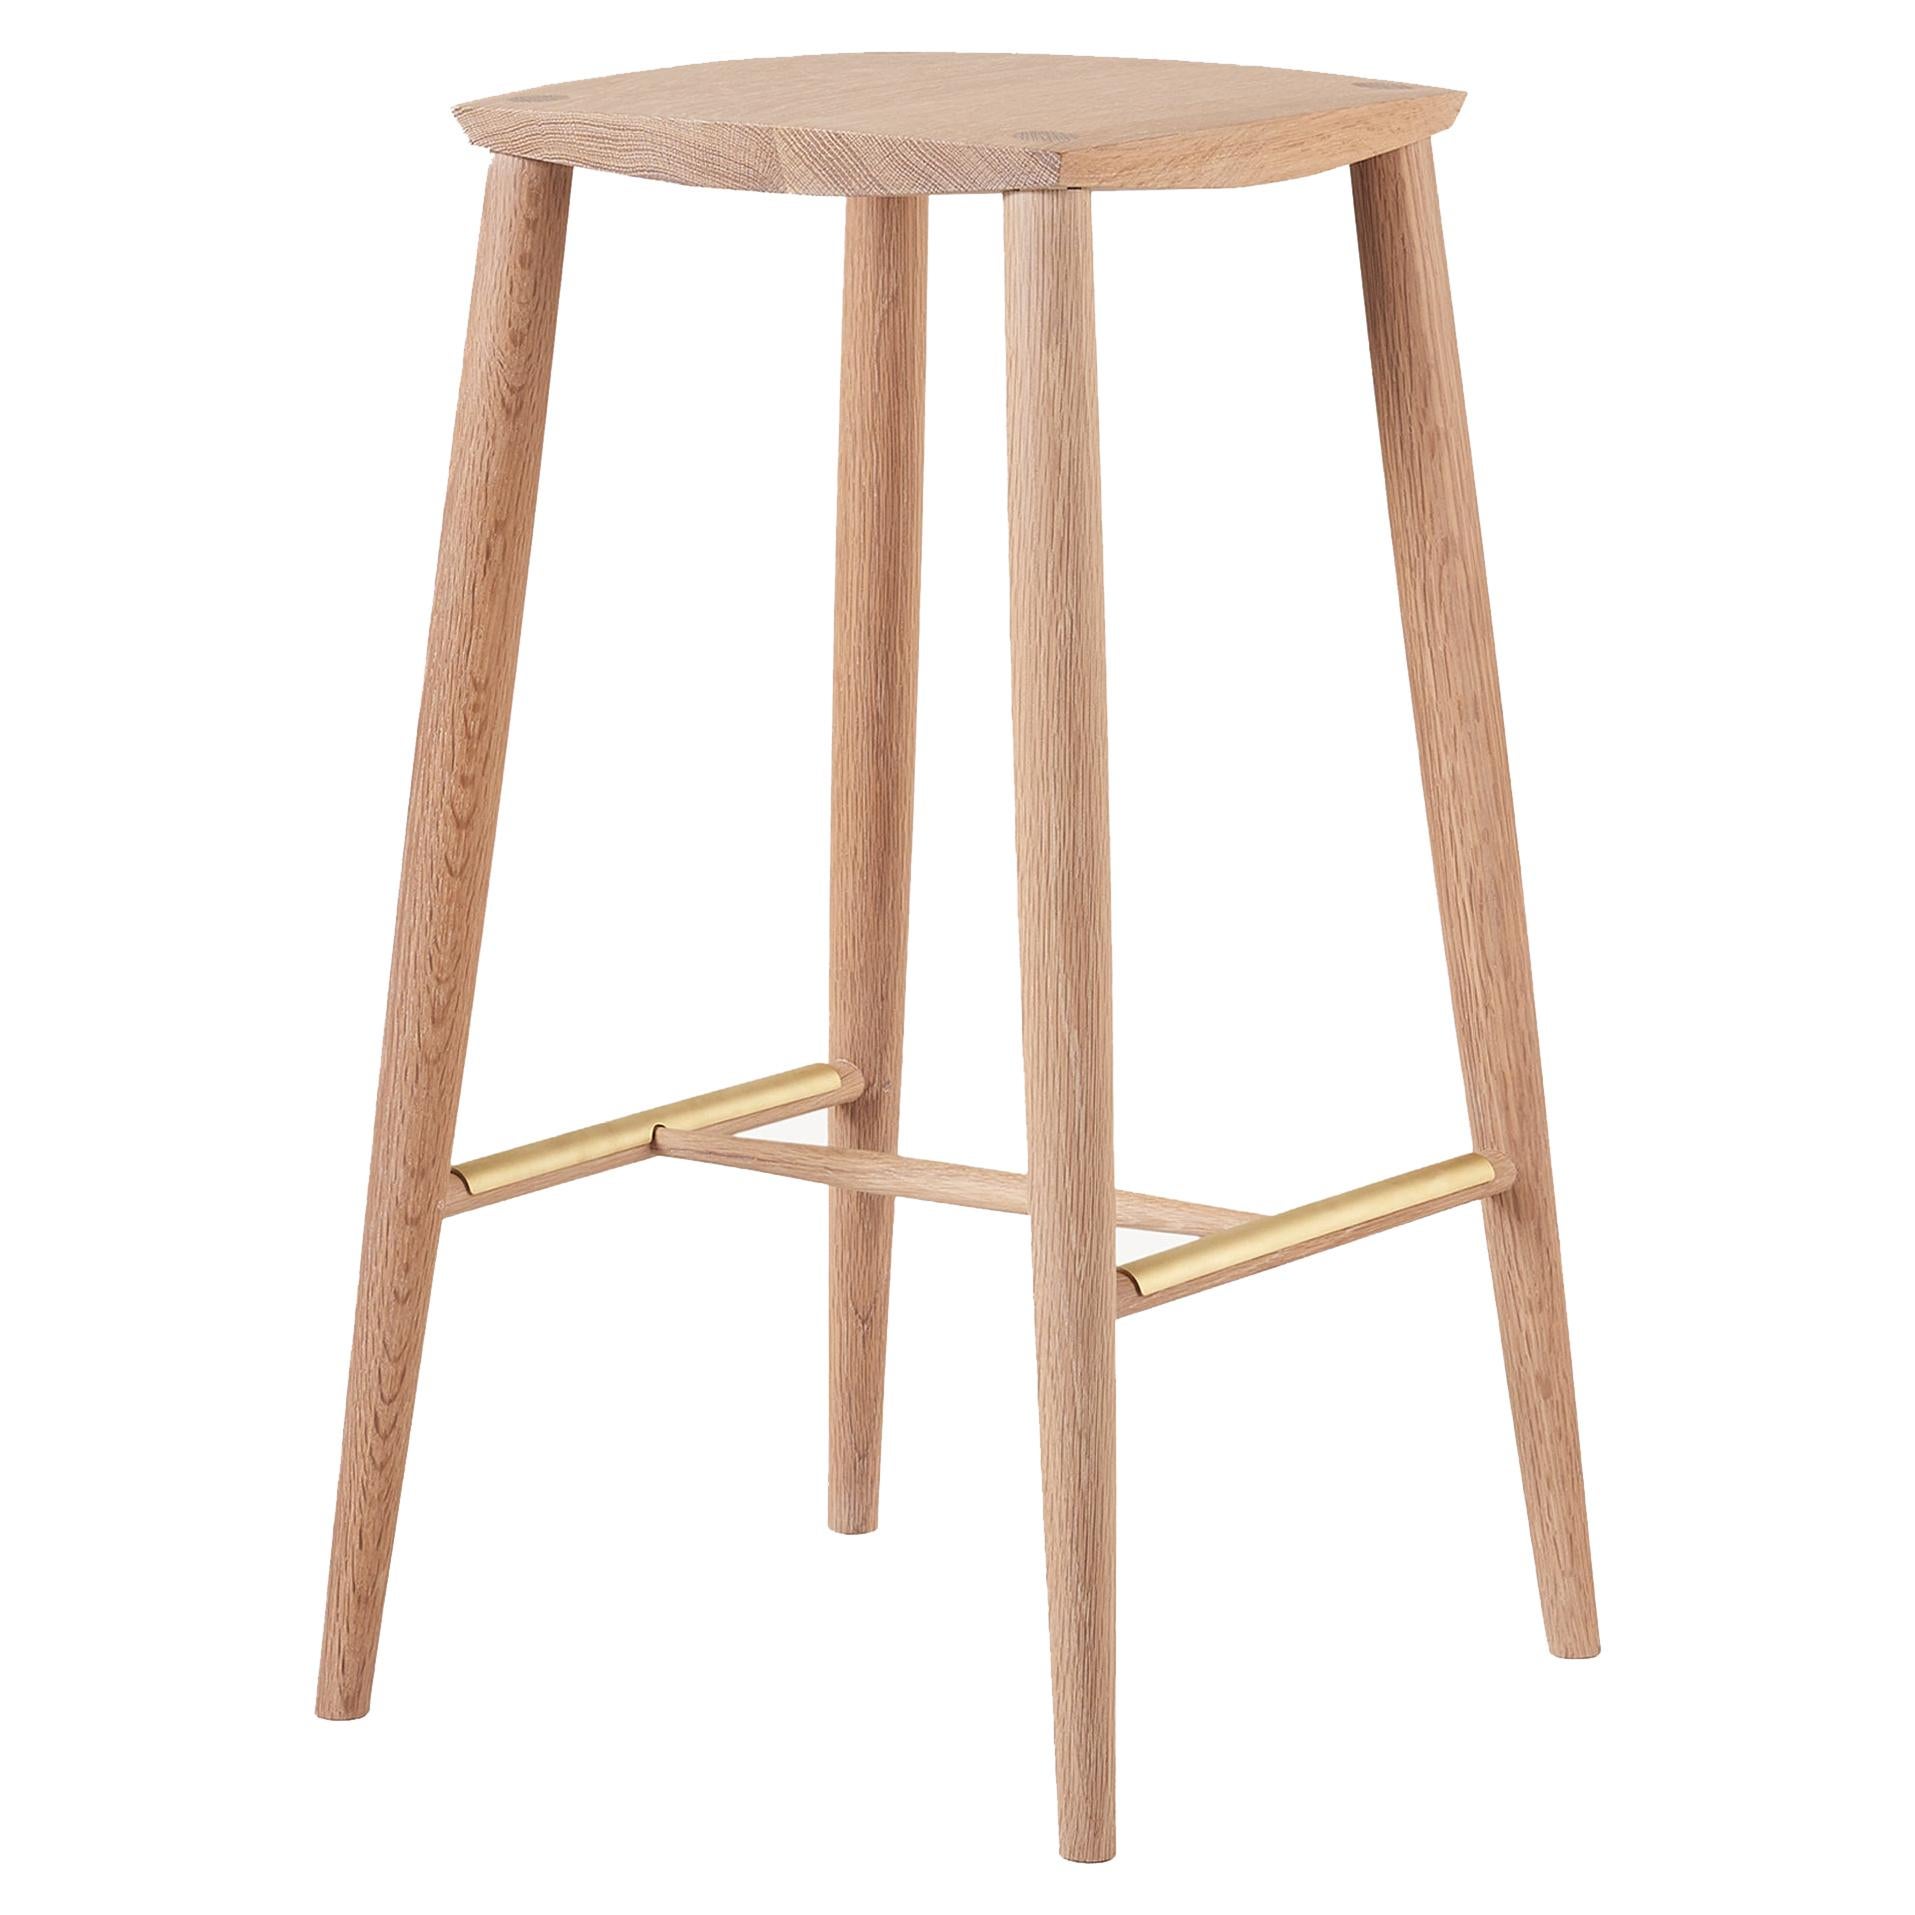 Minimal Bar Stool in Solid White Oak with Brass Foot Rests by Coolican & Company